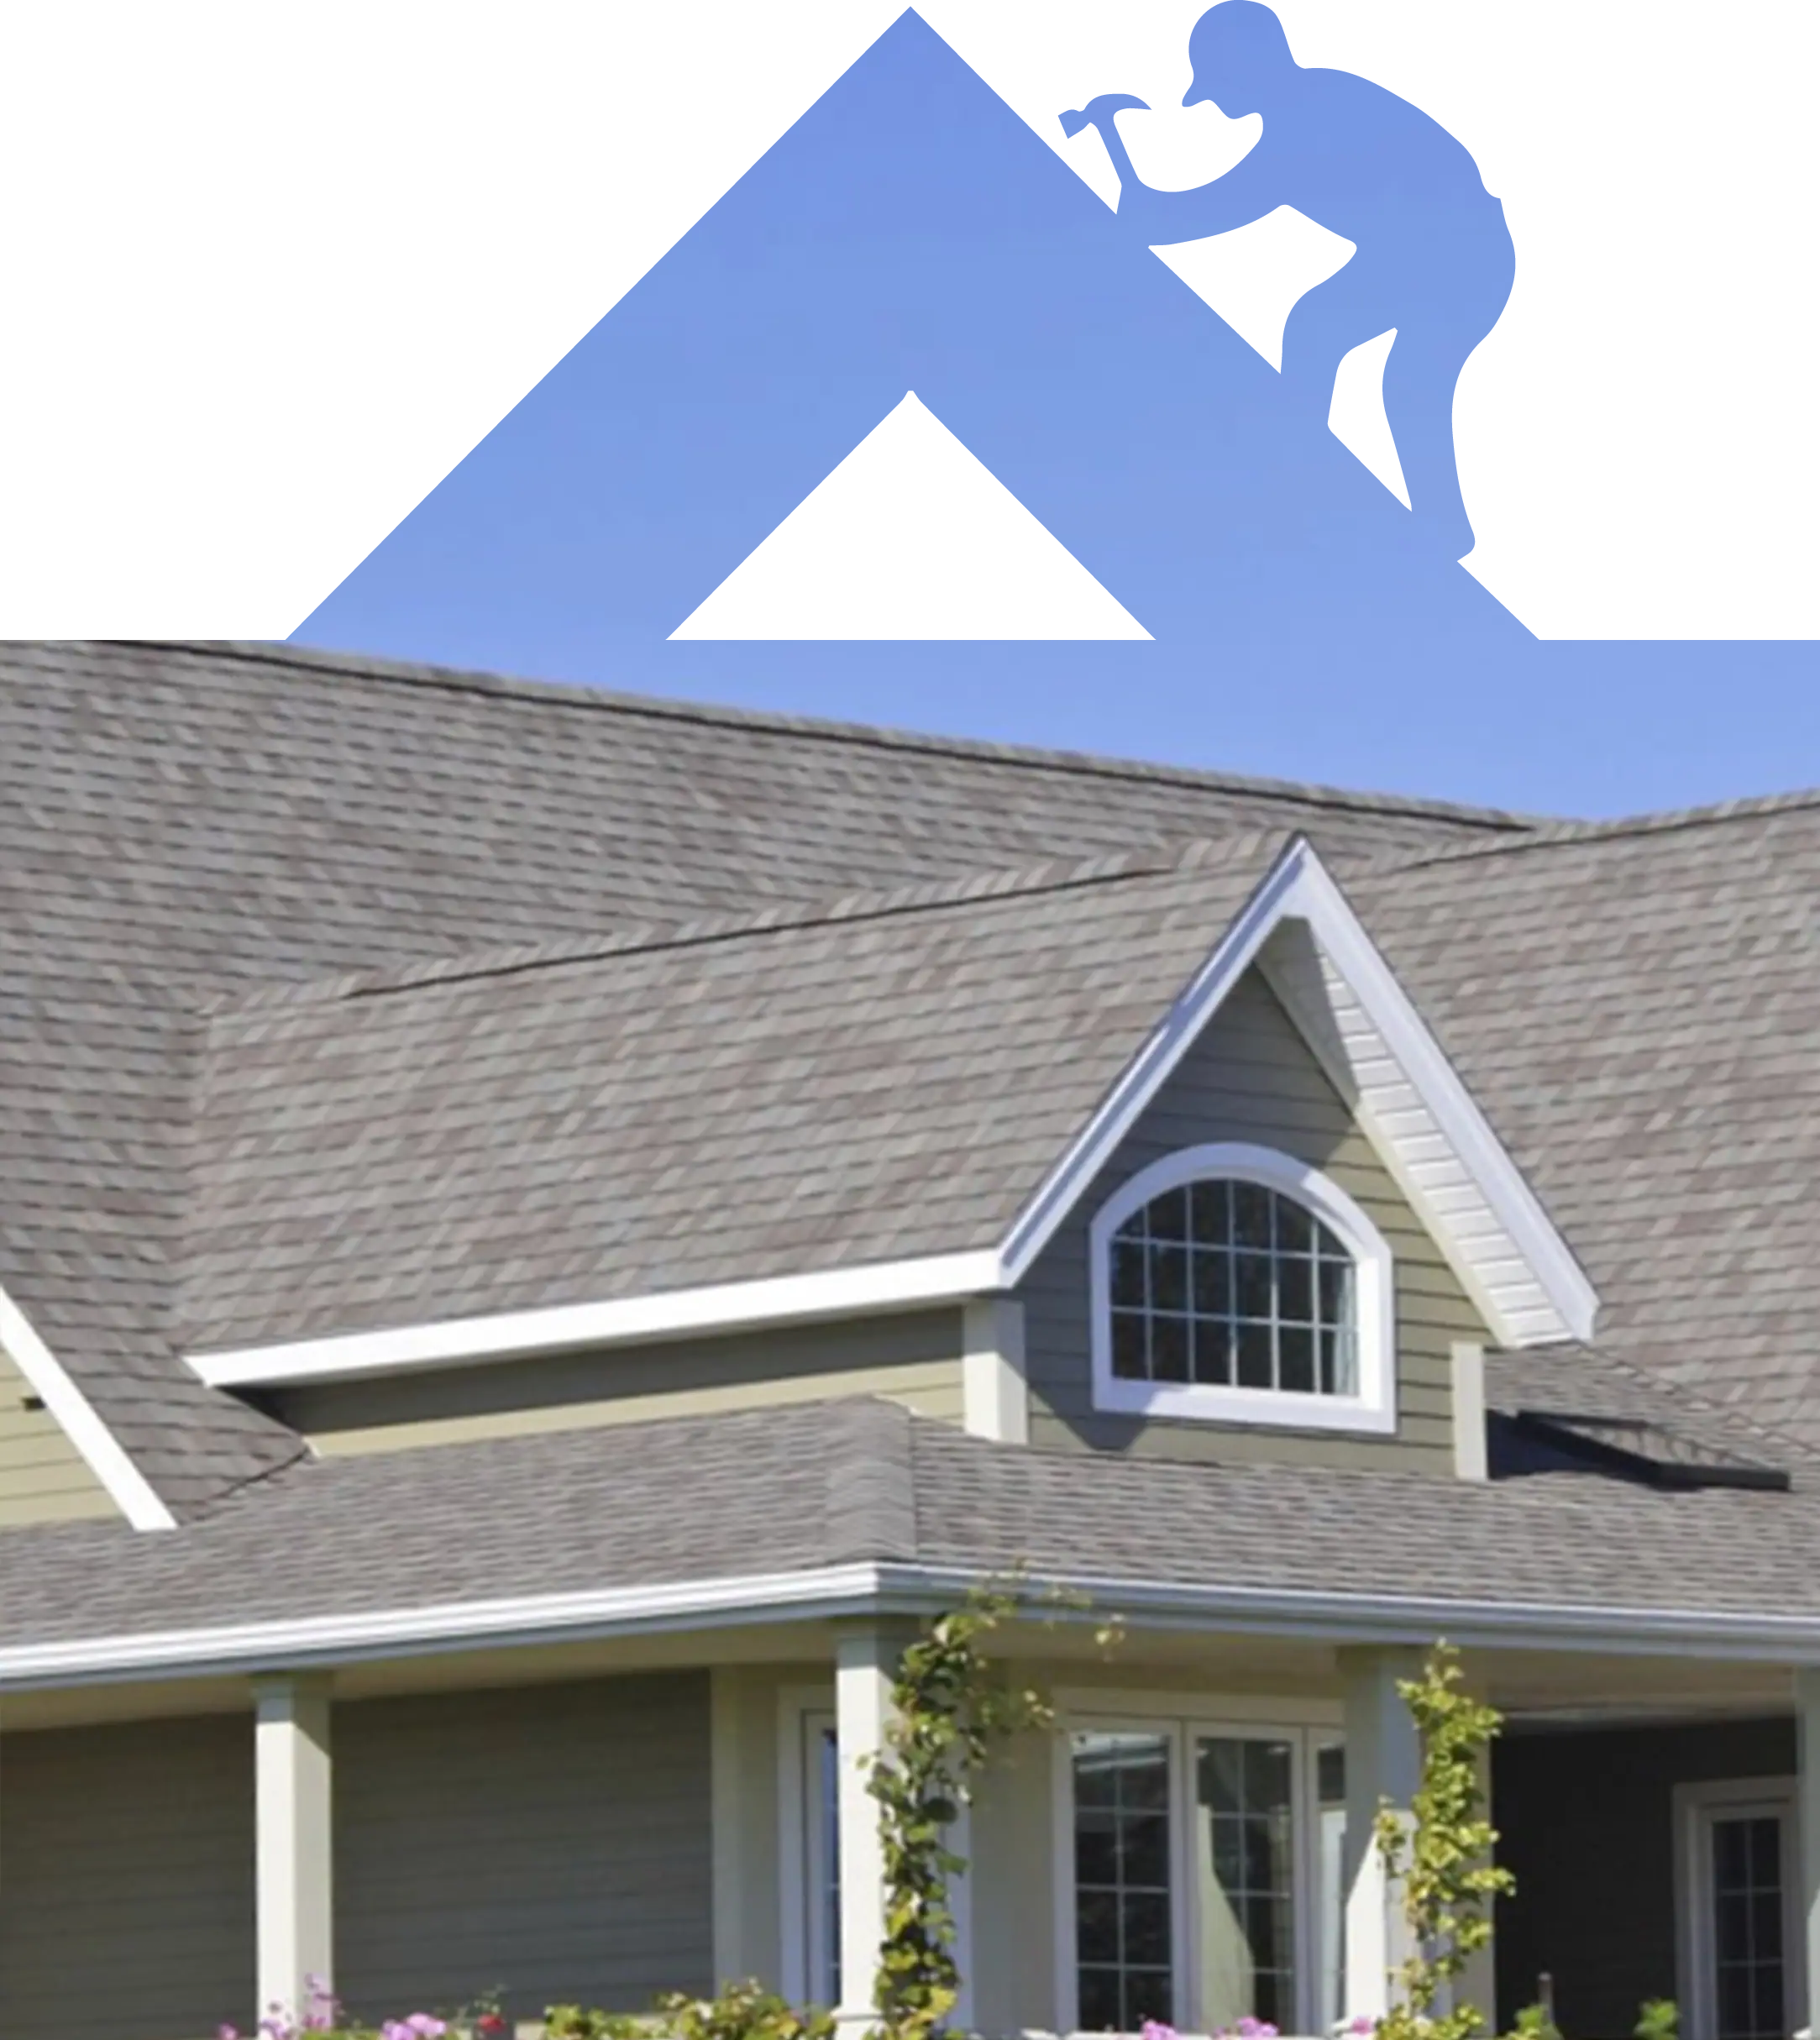 Close-up of a house's upper facade showing gray roofing, white trim, and a triangular dormer window against a clear blue sky.